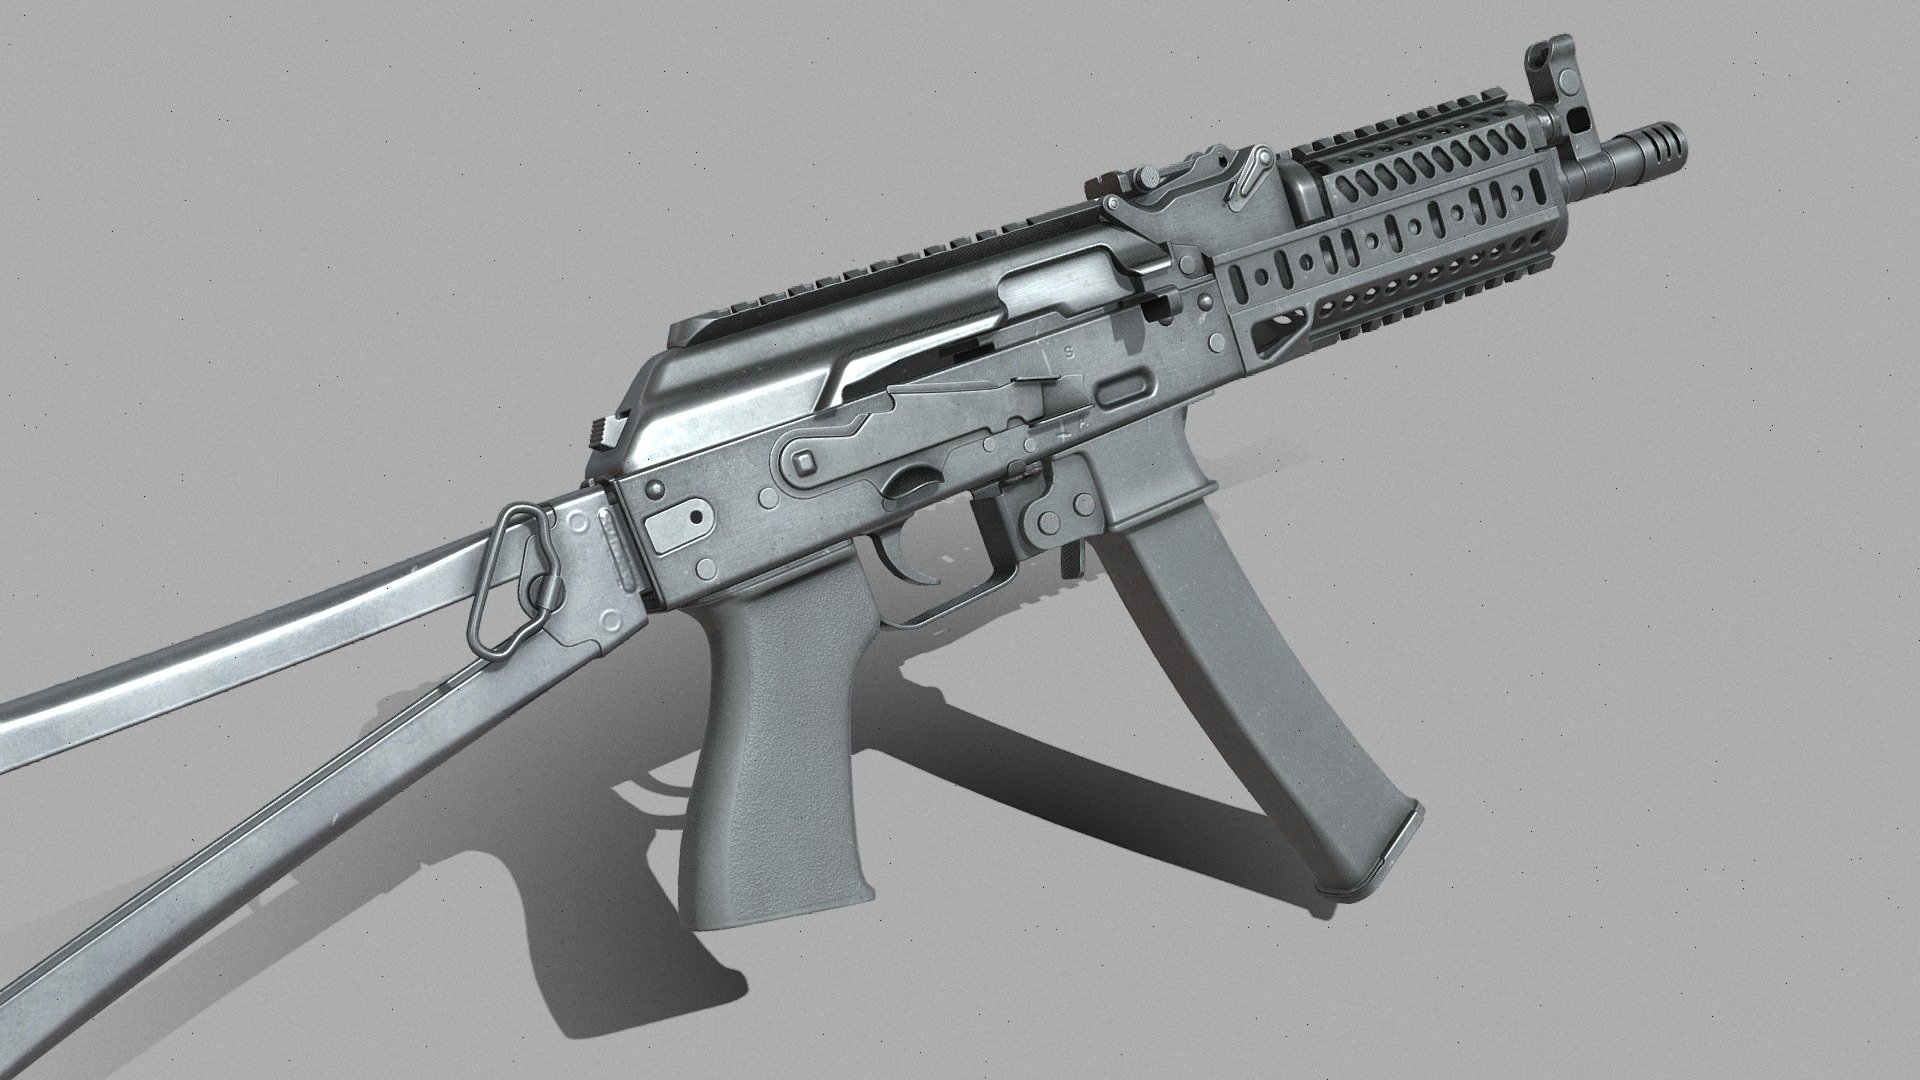 --------------------- !!! real life picatinny rail scale so you can add any attachments to the weapon !!! -------------------------

Lowpoly pp 19 vityaz model optimized for game engines or any other usage in 3d software.

Parts are properly named, ready for rigging !

Fully assembled weapon model with all attachments INCLUDED !

Included file formats: Fbx (for all objects), OBJ for only weapon and organized blender file with all 3d objects !

High quality textures and texture sets for weapon model and attachments (pp19 base 4K , Folding stock 2K, 9mm ammo 1K, pistol grip 2K, magazine 2K and zenitco handguard 2K)

Supports physically based rendering (PBR) !

Also comes with textures optimized for Unreal Engine 4 and Unity !

-------- 3d model has 38666 triangles -------------

PBR Textures contain: base color, roughness, metallic , ambient occlusion and normal map

Unreal engine textures contain: base color , normal map and ORM

Unity textures contain: base color, MetallicSmoothness and normal maps - PP19 Vityaz  game-ready - Buy Royalty Free 3D model by janxo 3d model